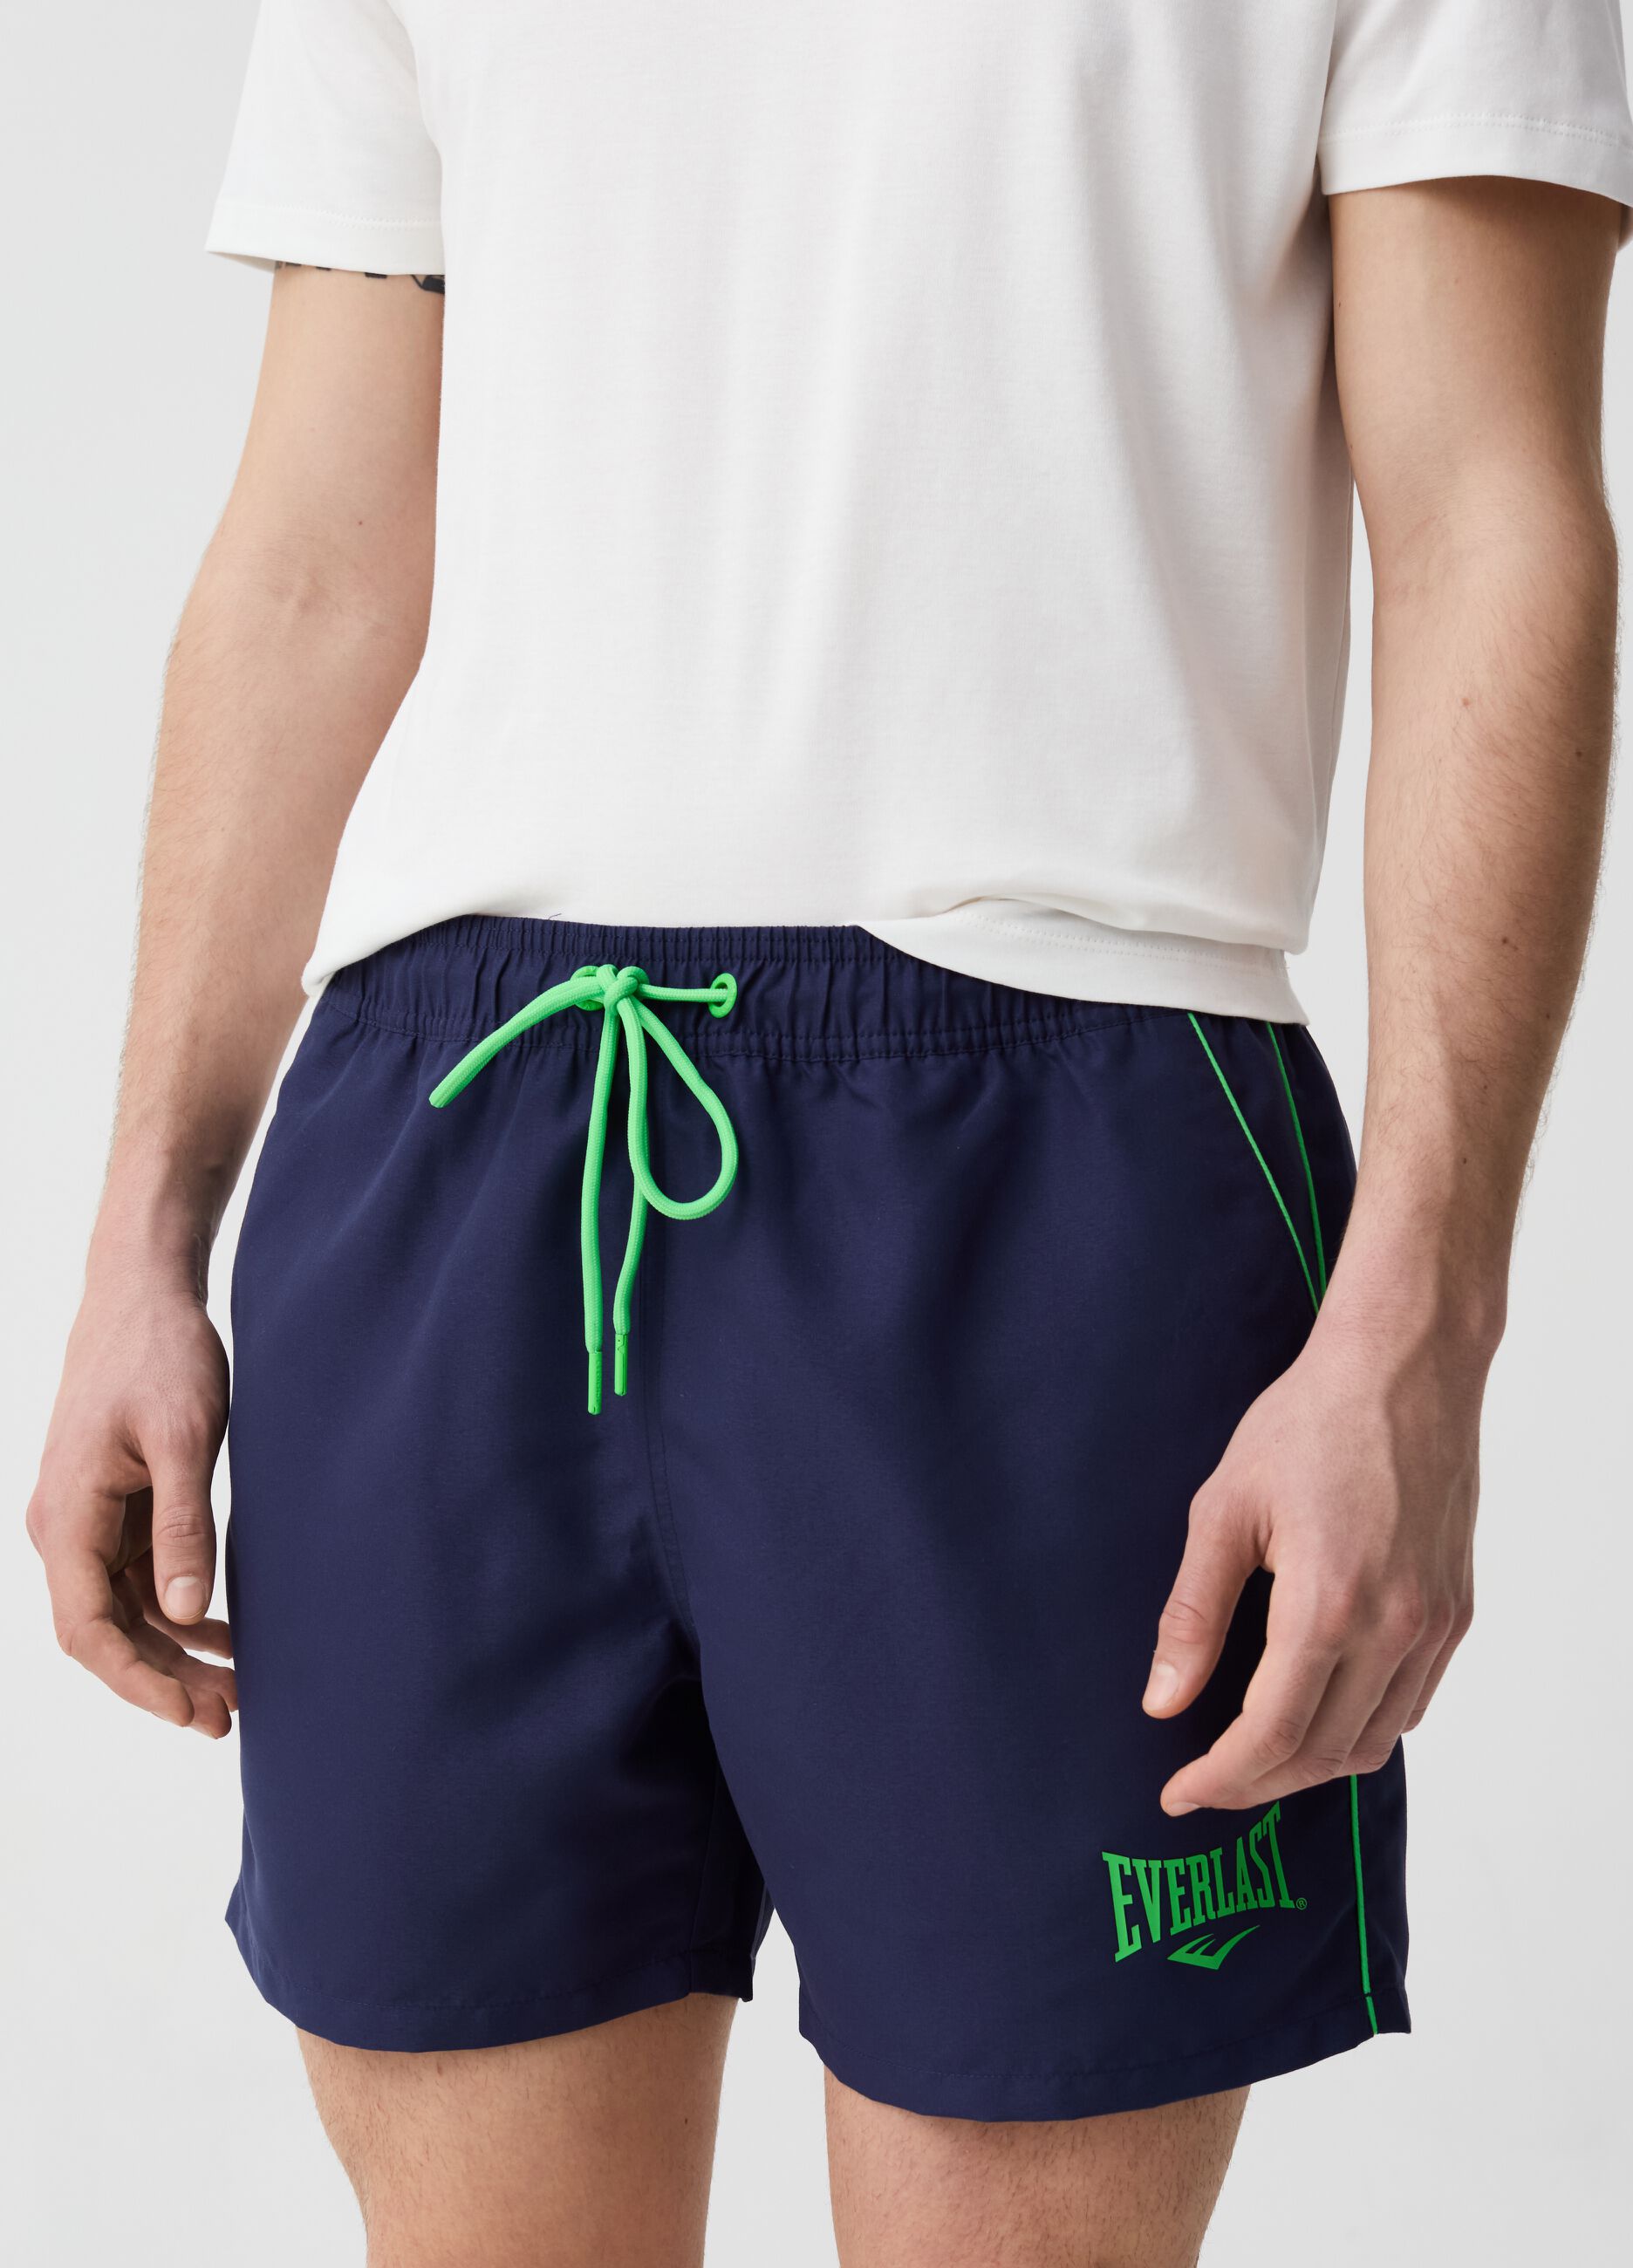 Swimming trunks with contrasting details